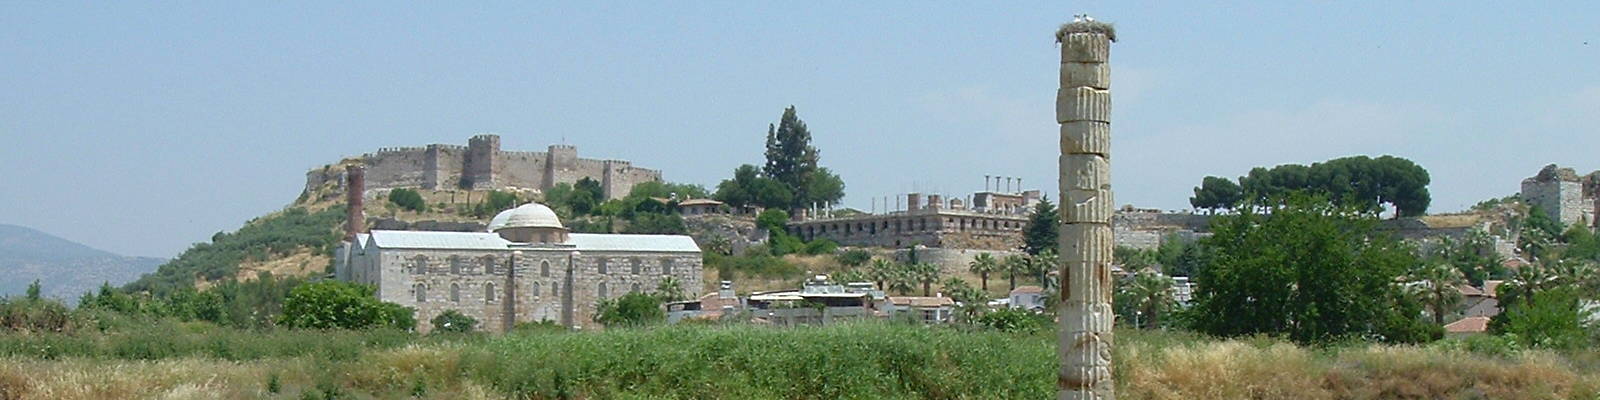 Temple of Artemis, ruins of the Basilica of Saint John, Isa Bey Mosque, and Byzantine fortress.